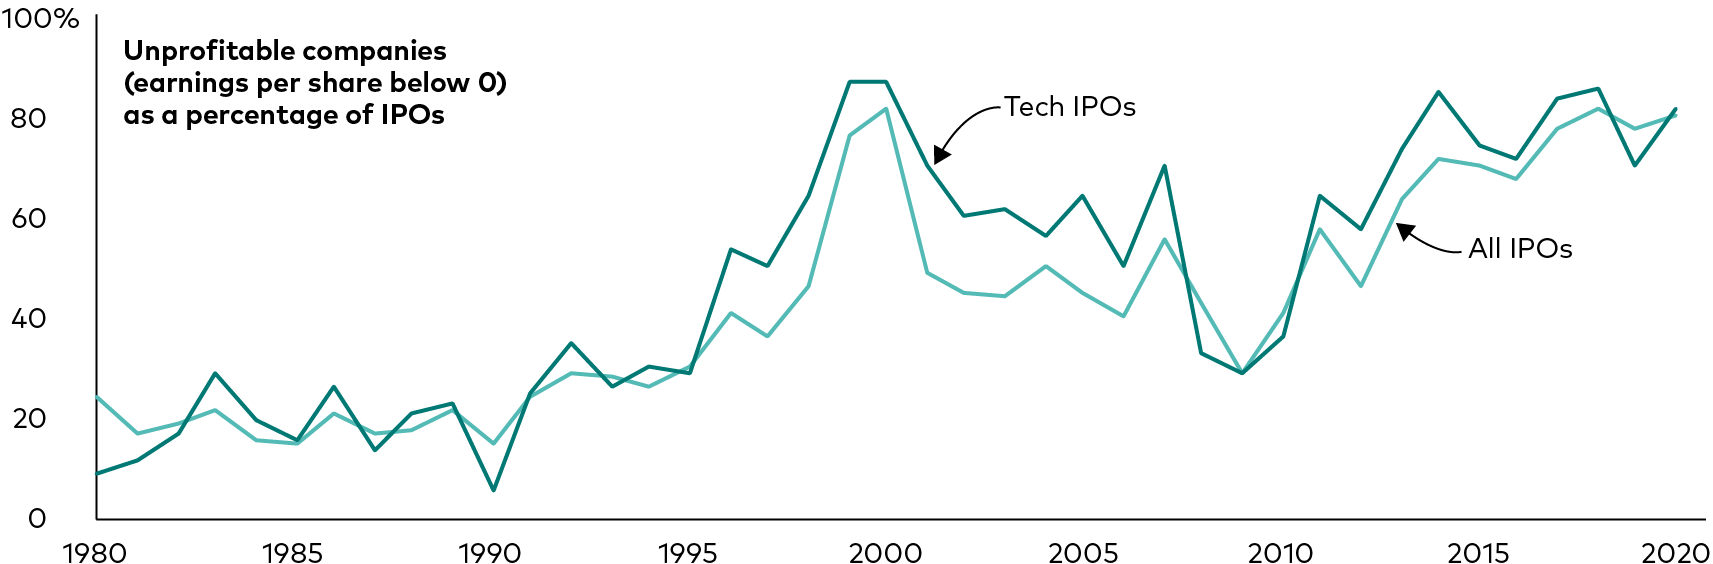 The illustration shows an increase in recent years of the percentage of all companies, and of tech companies, with earnings per share below zero among companies offering shares publicly for the first time. The percentages have reached levels similar to those just before the dot-com bubble burst soon after the start of this century.